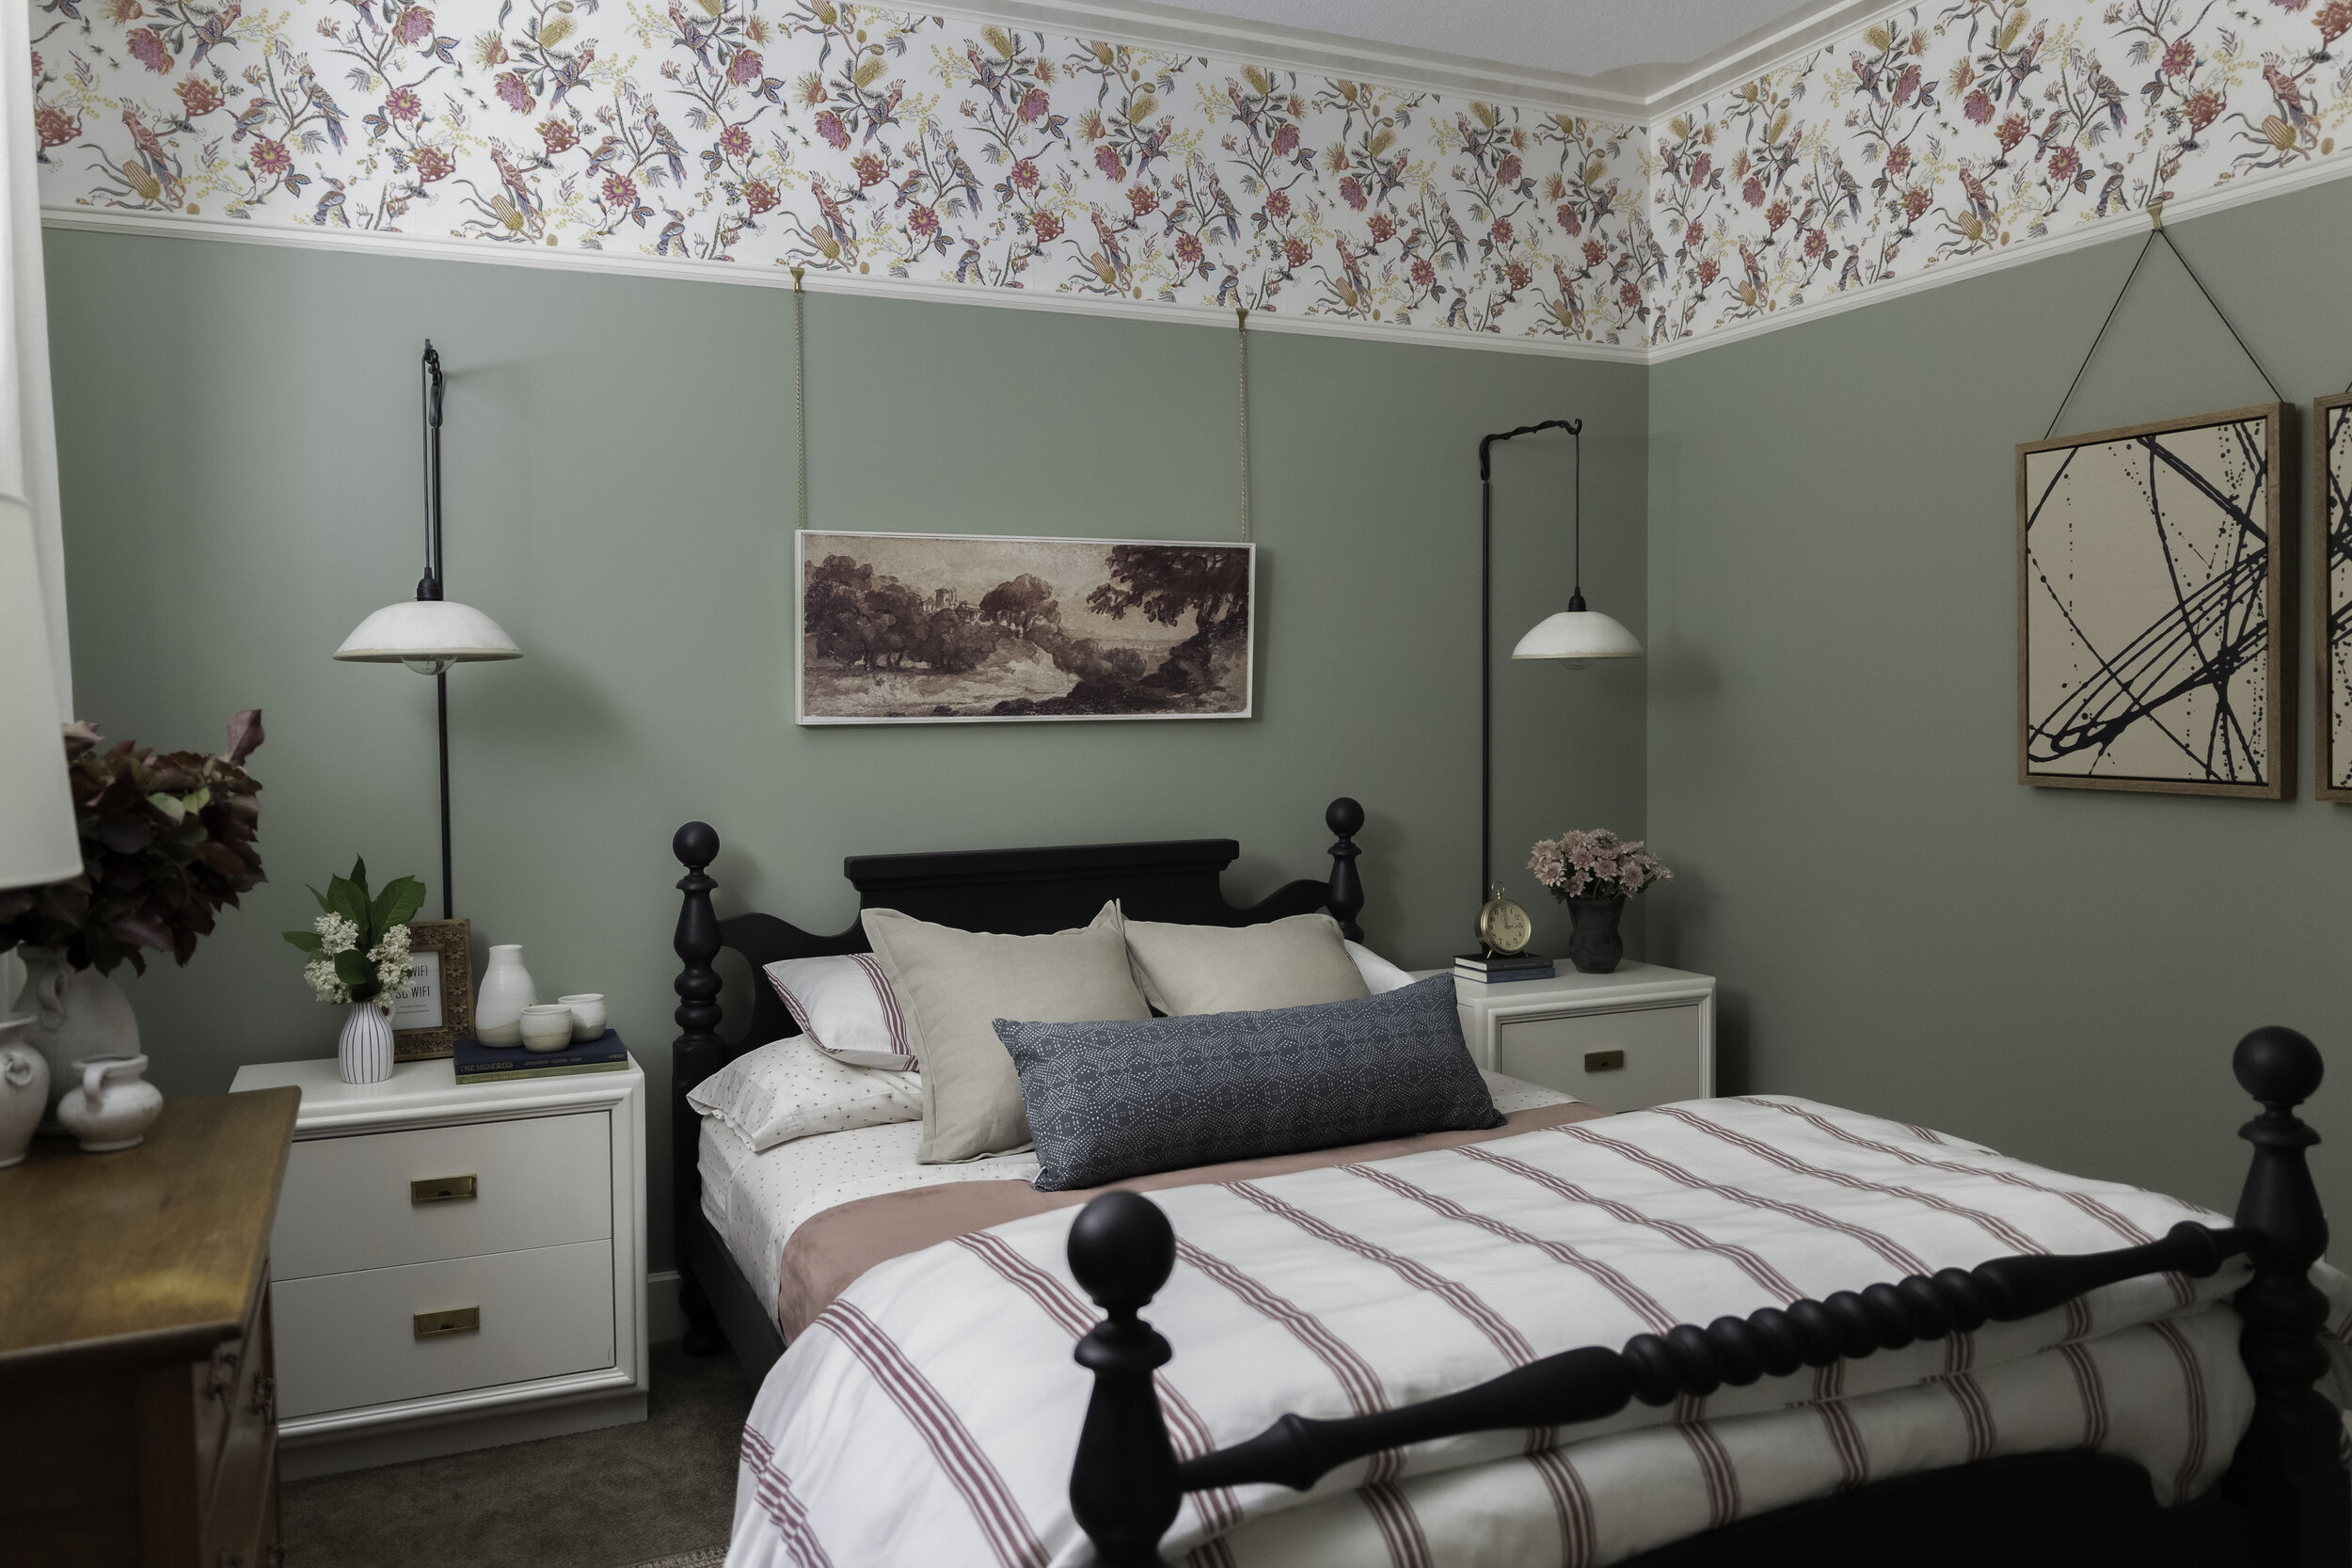 green bedroom with wallpaper at top of wall, red striped bedding, white modern nightstands, hanging ceramic wall sconces, vintage rug and black antique bed and antique wood dresser